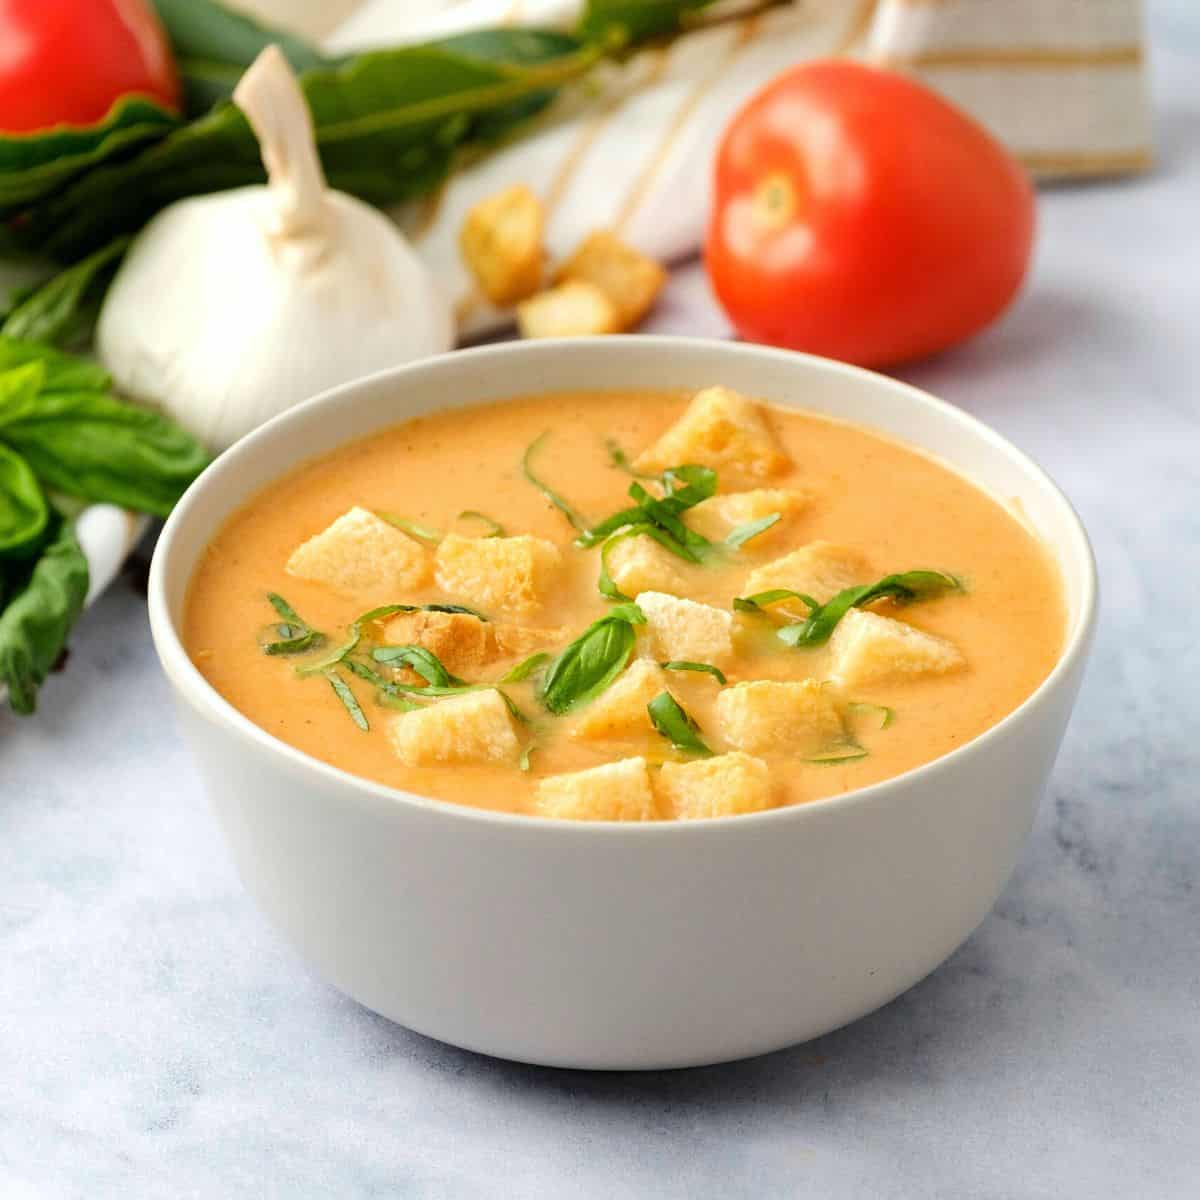 https://amindfullmom.com/wp-content/uploads/2021/01/Instant-Pot-Chicken-Creamy-Tomato-Soup-Easy.jpg